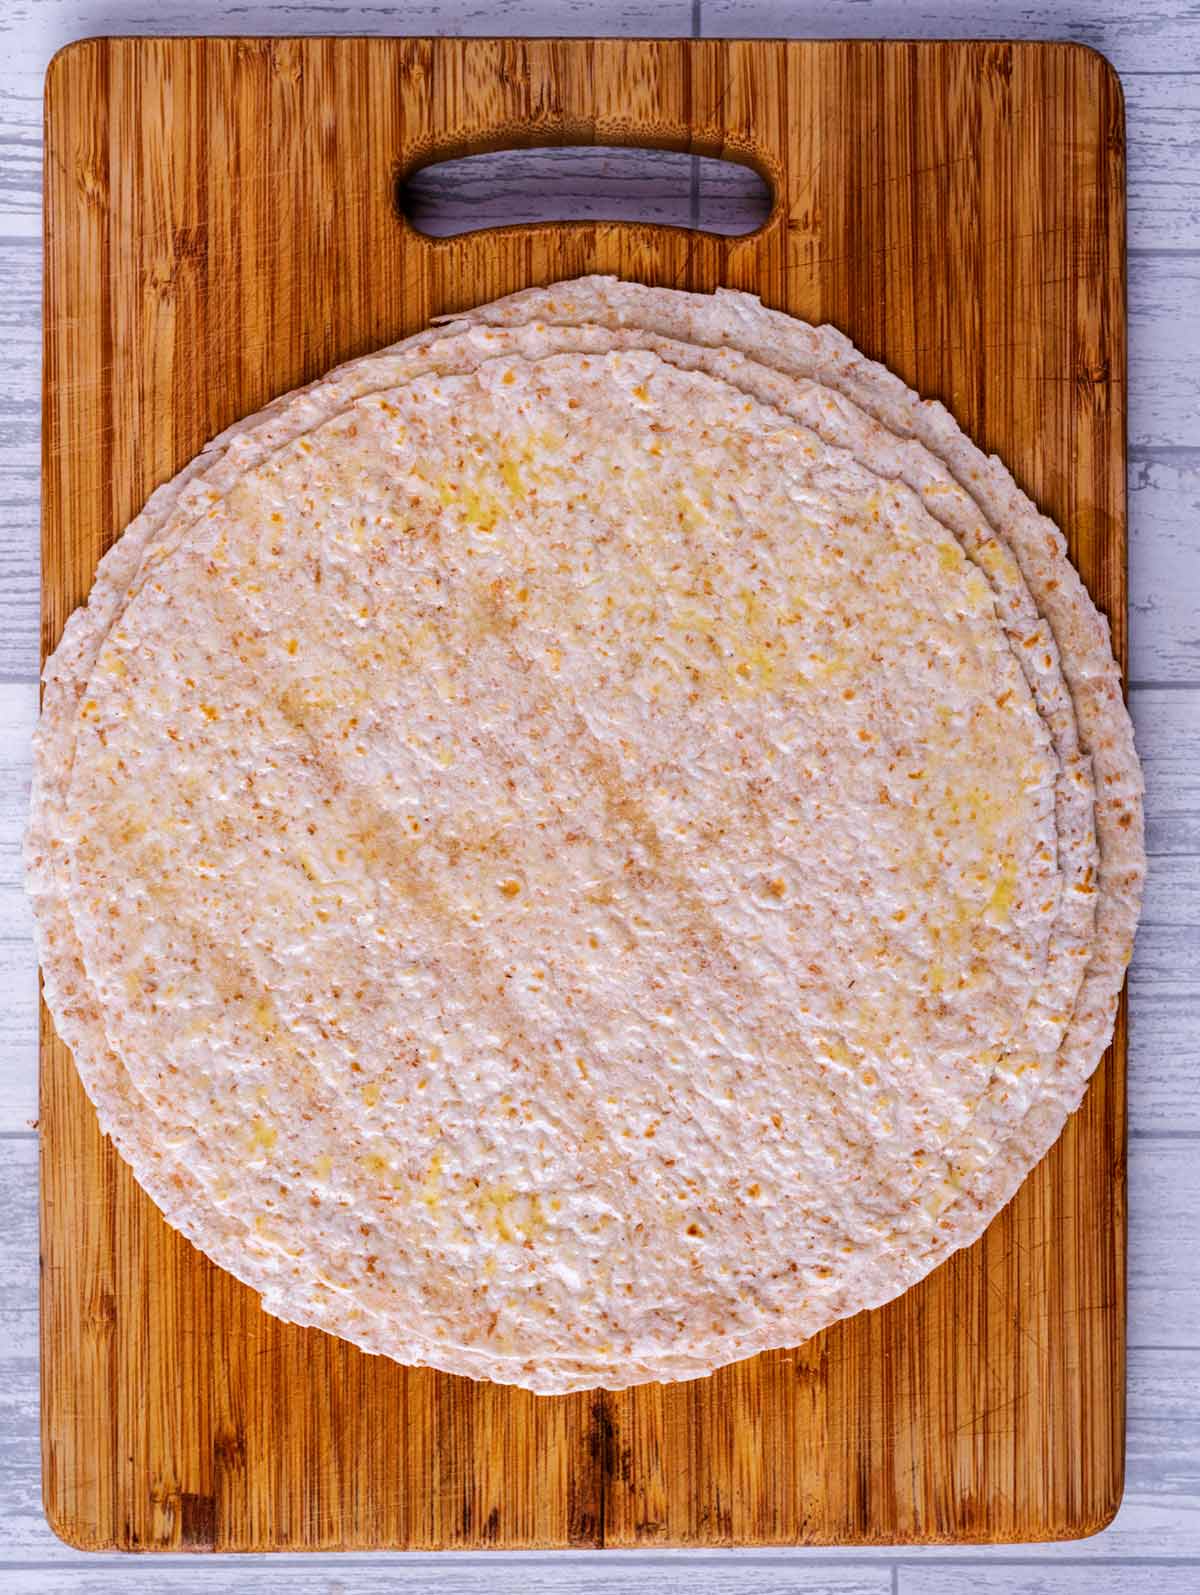 Flour tortillas spread with oil on a wooden chopping board.